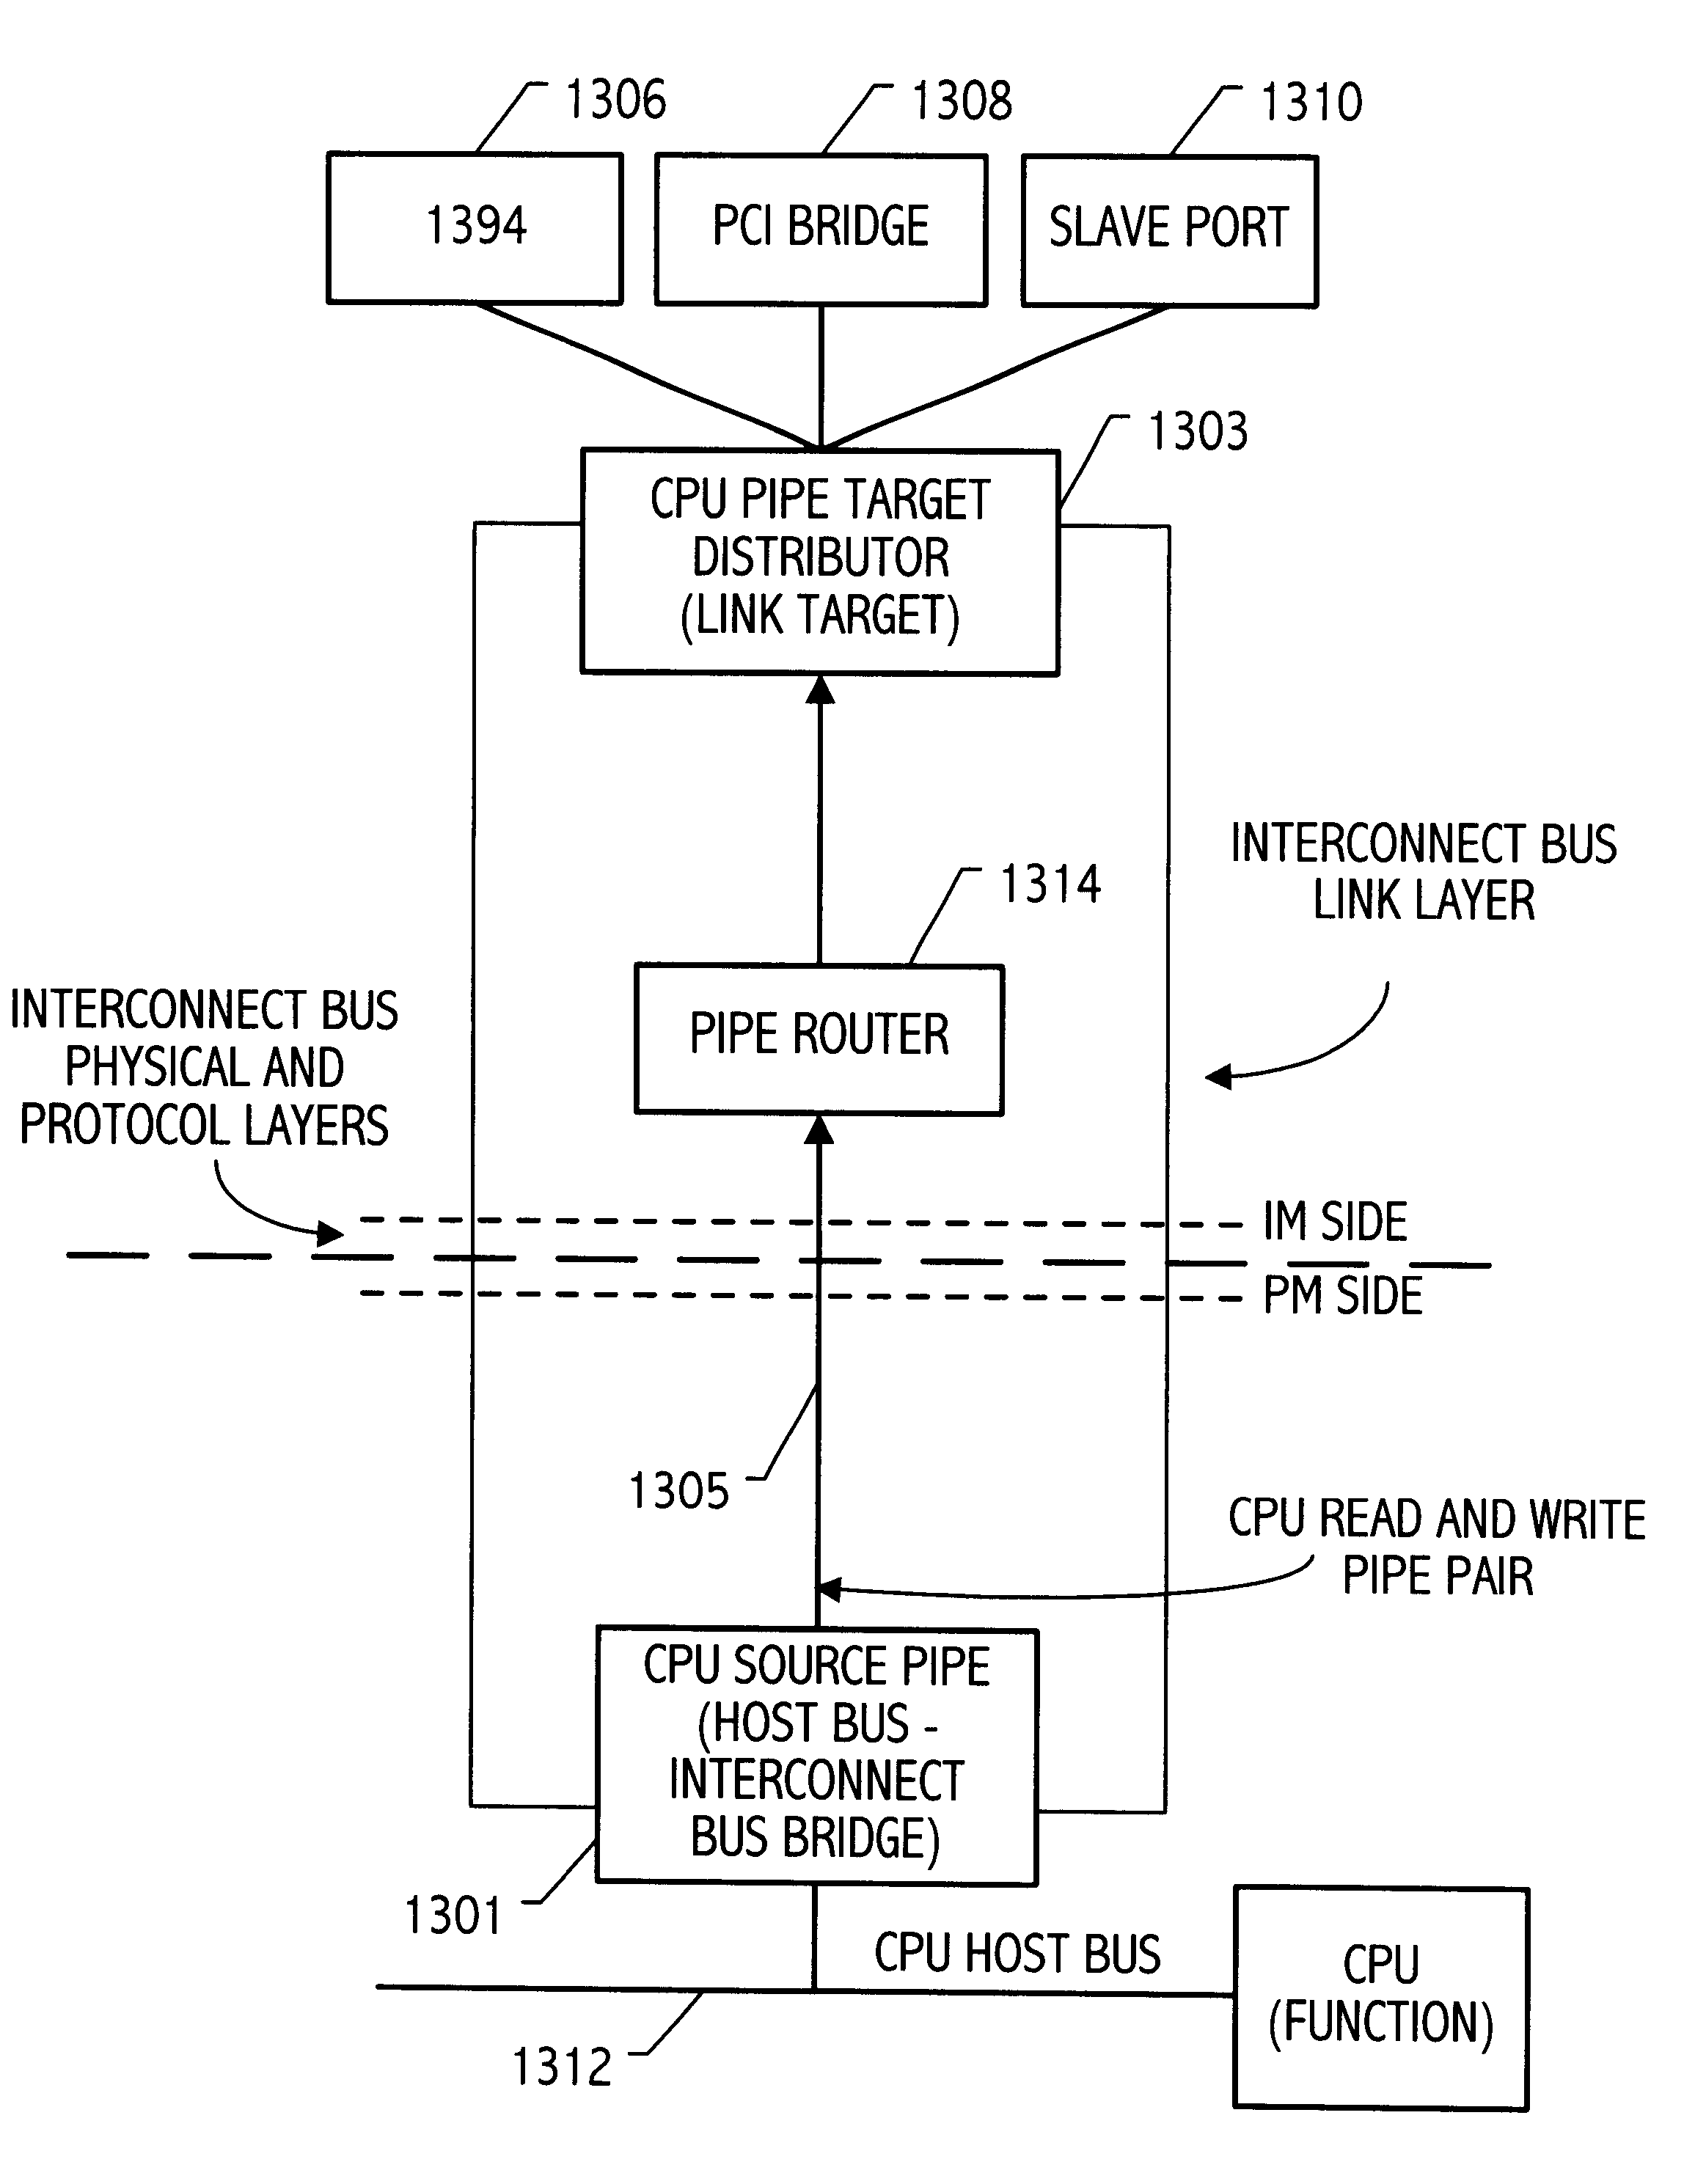 Target side distributor mechanism for connecting multiple functions to a single logical pipe of a computer interconnection bus